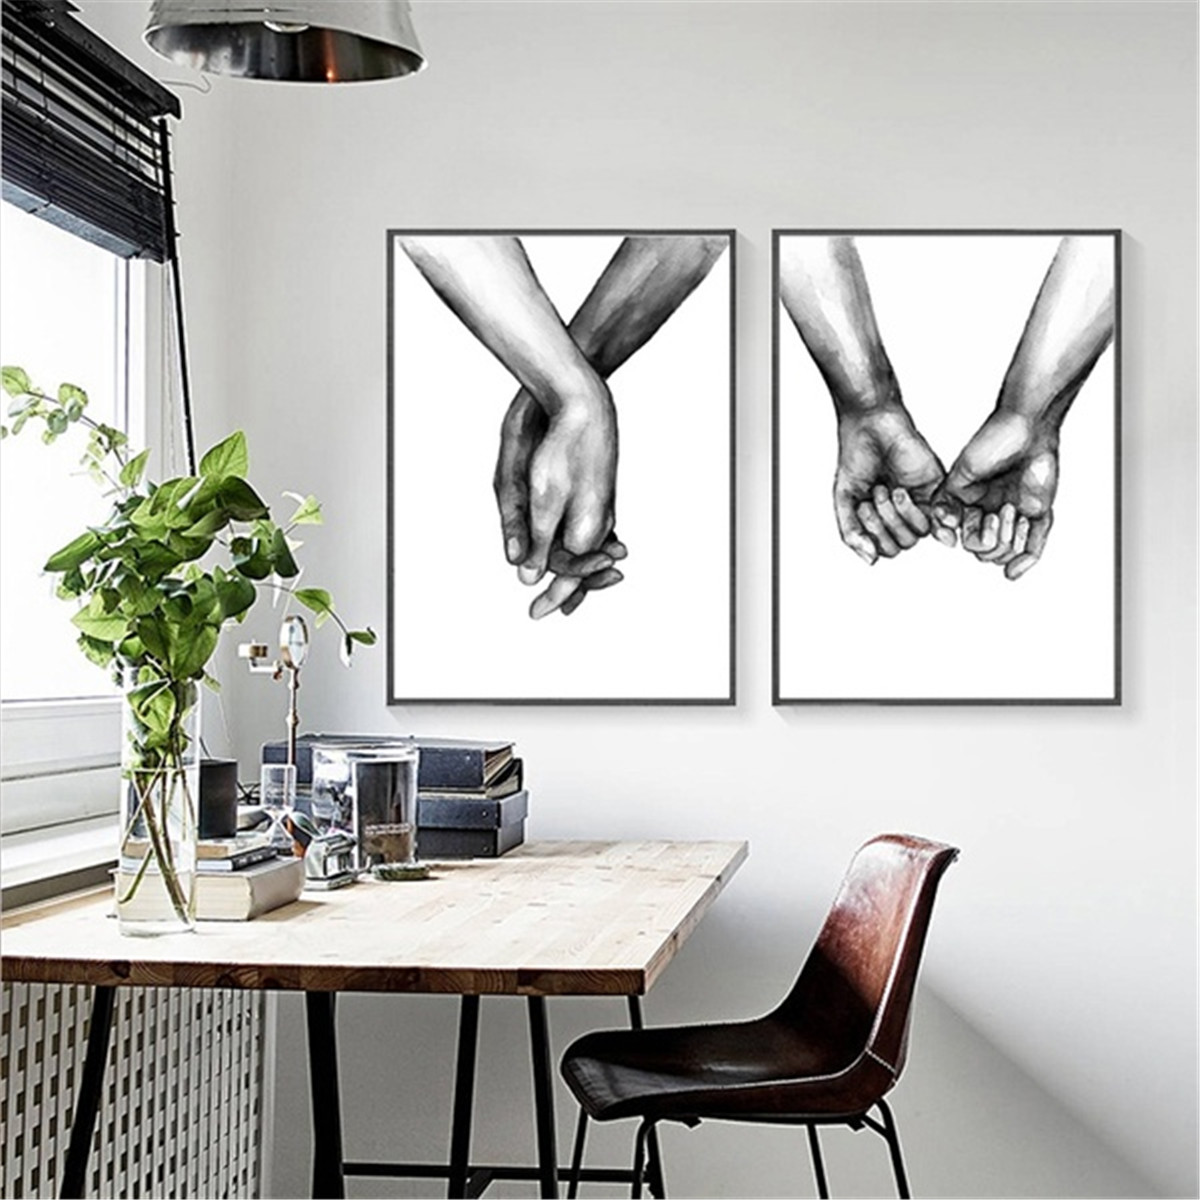 Holding-Hand-Black-And-White-Picture-Cambric-Prints-Painting-Love-Wall-Sticker-Home-Decor-1595537-4